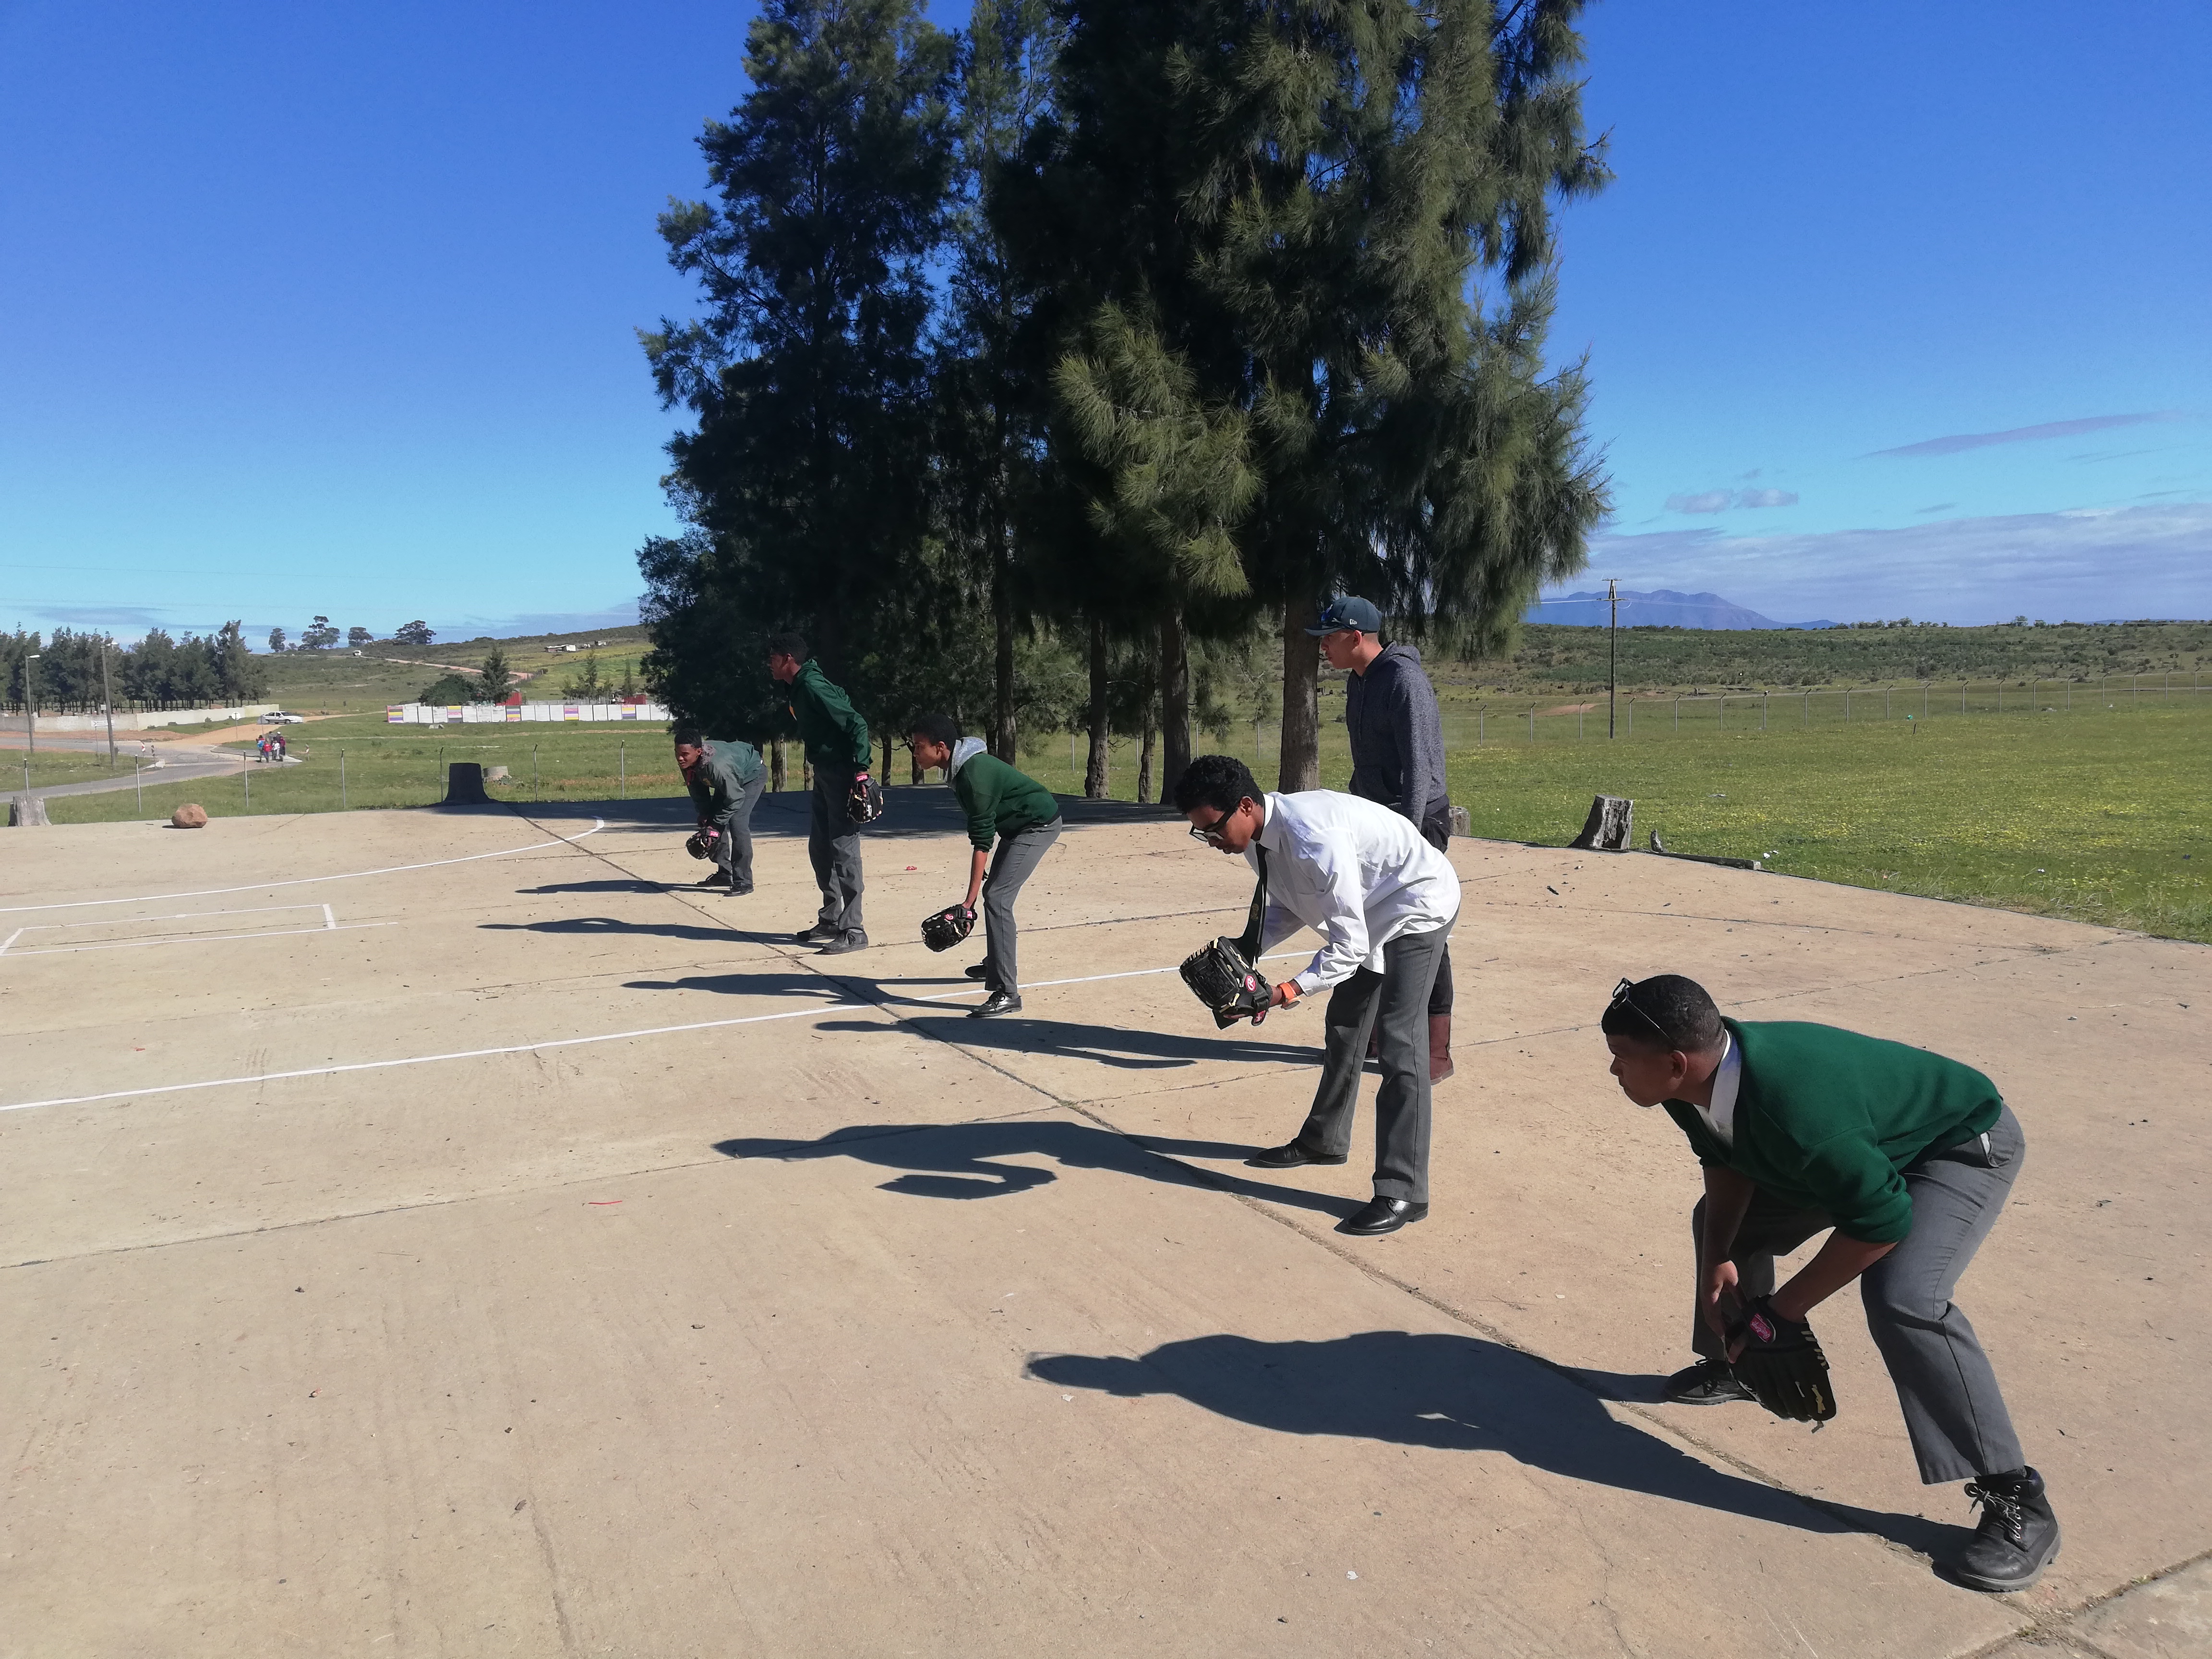 Learners learn the basics of softball at the Olympic Values roadshow in Saron